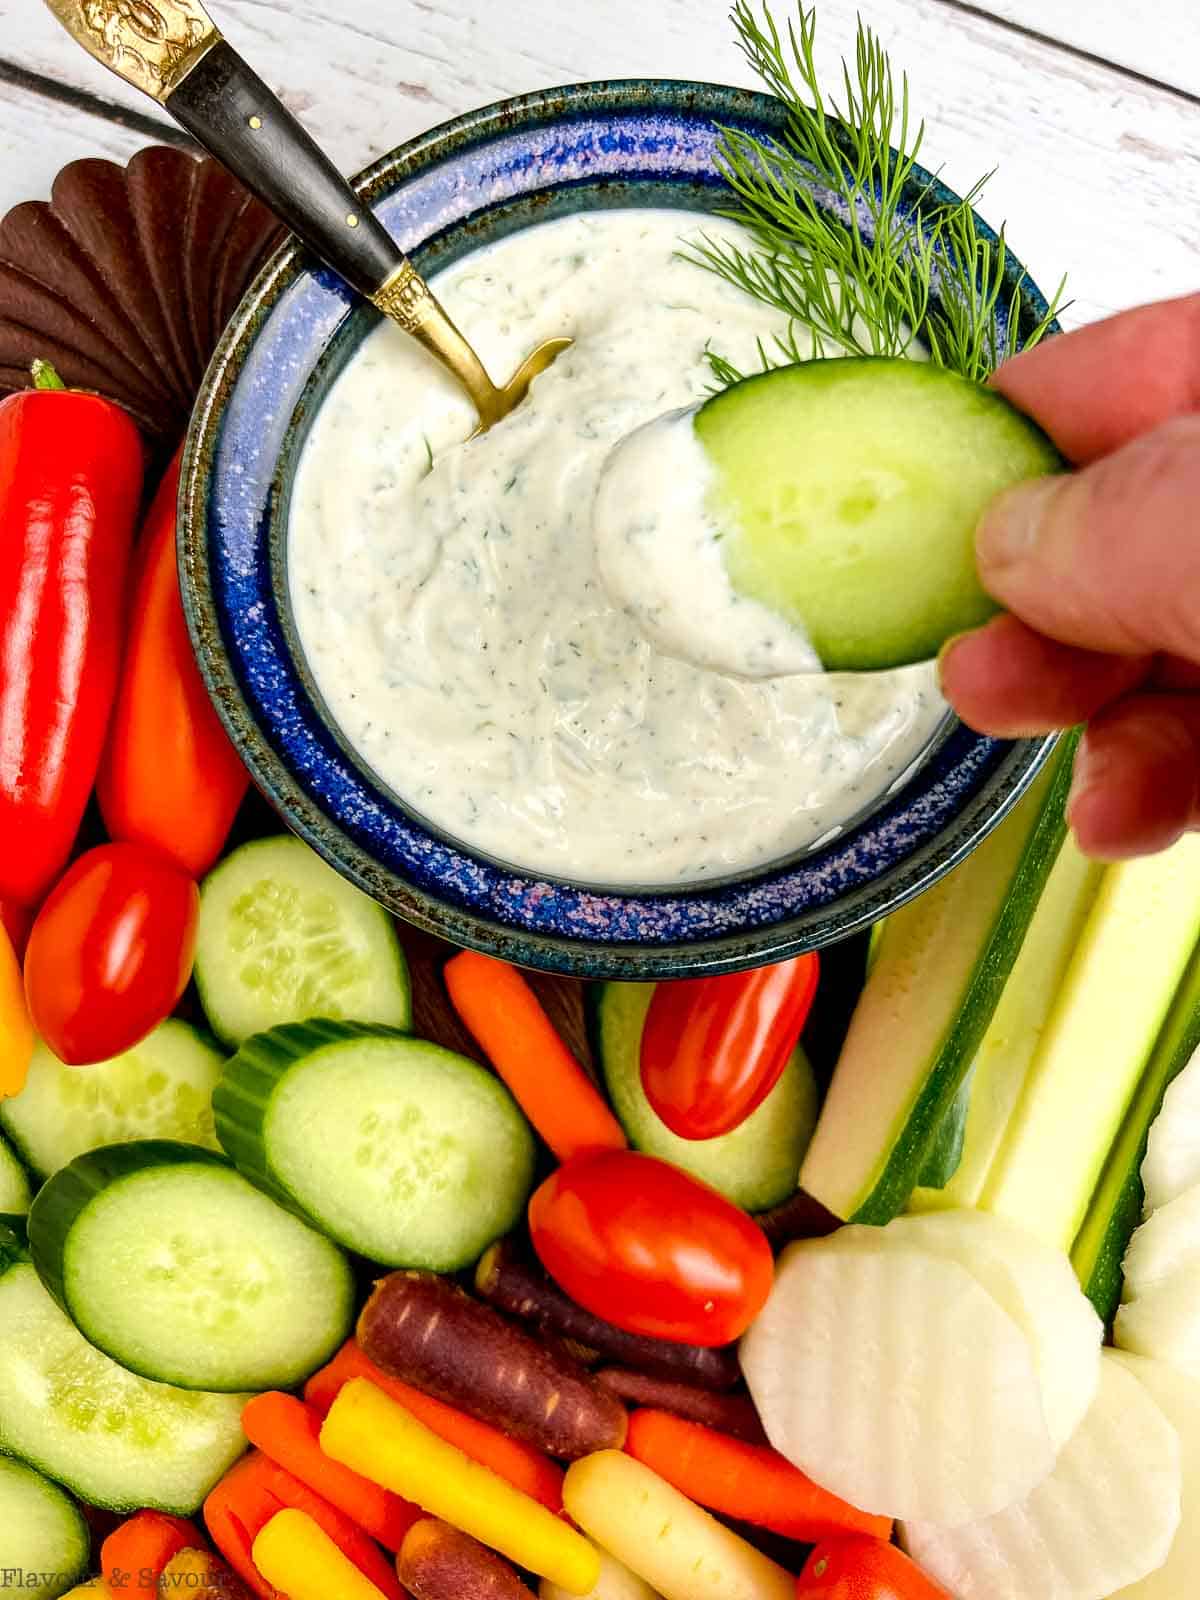 Dipping a slice of cucumber in homemade dill dip.